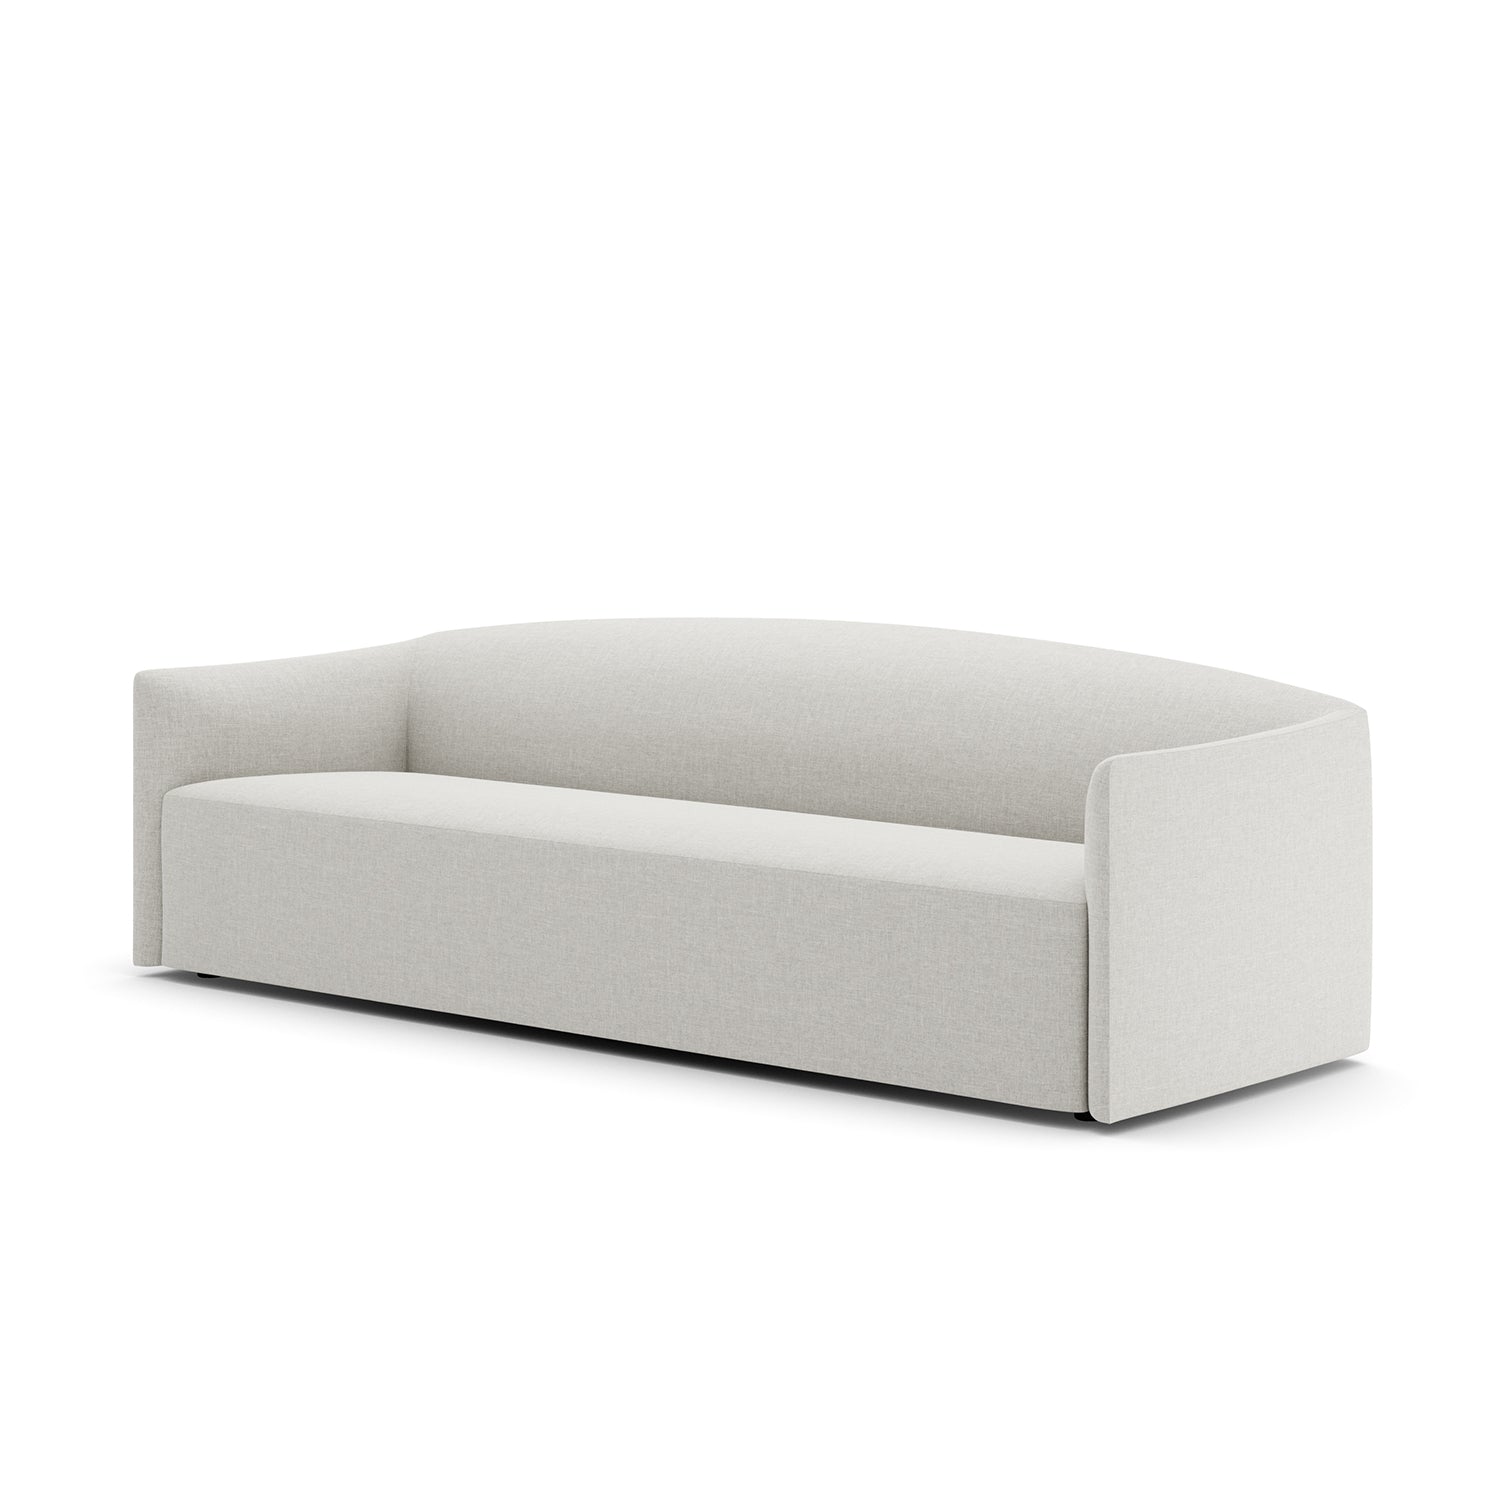 New Works Shore 3 Seater Sofa in quill side angle